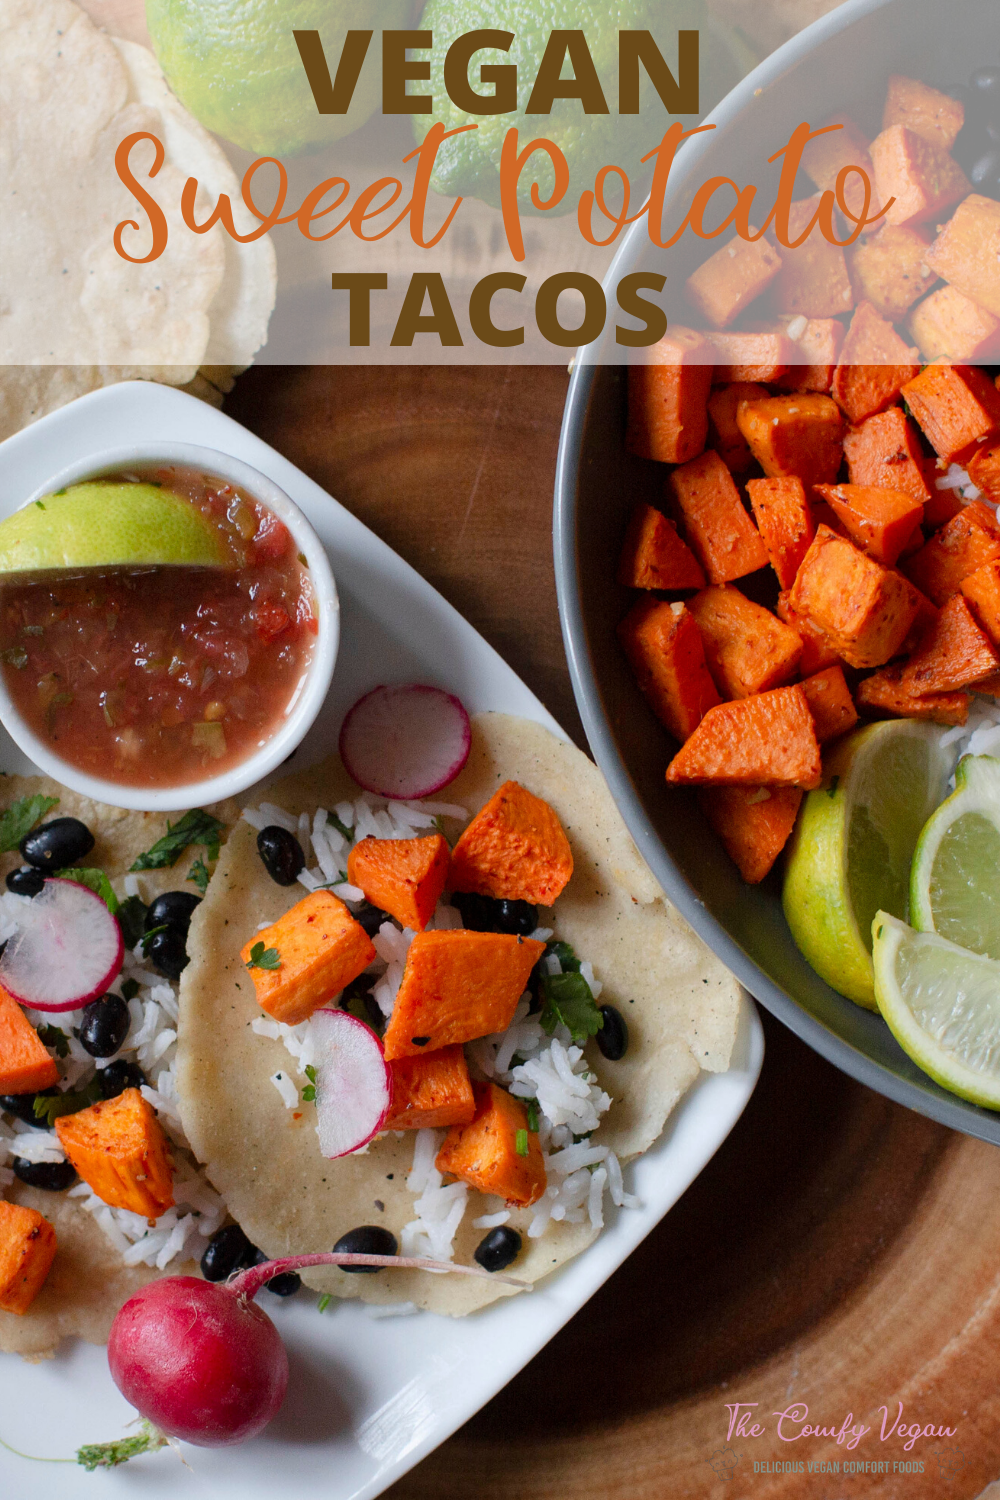 These sweet potato tacos are so simple and easy to make. You'll love the simple change for your next Taco Tuesday! So tasty, good, and vegan!